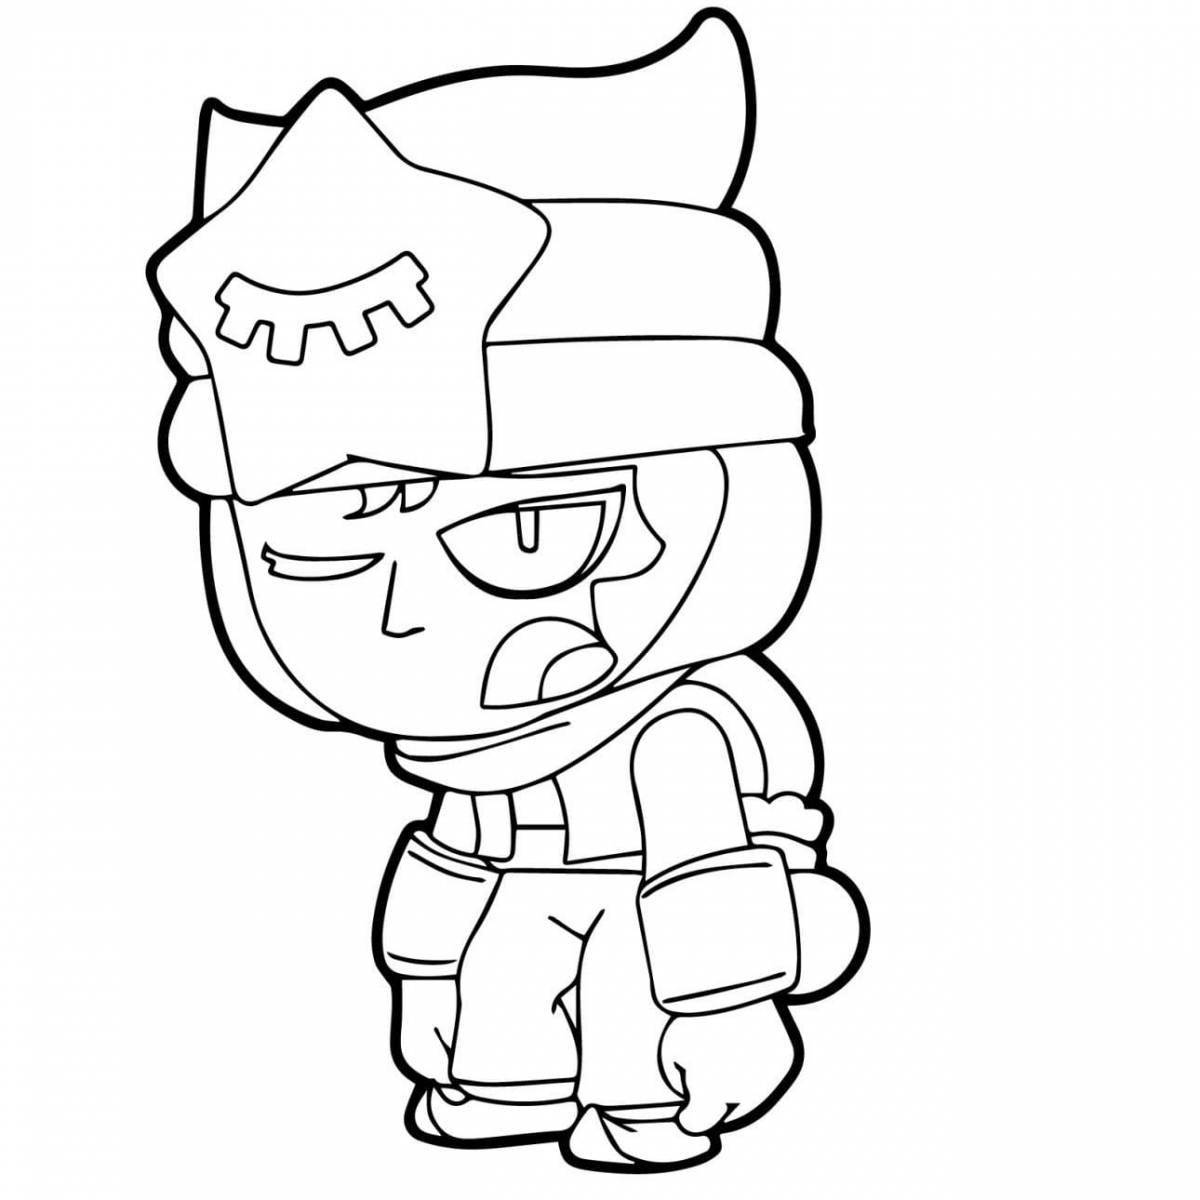 Animated brawl stars coloring page